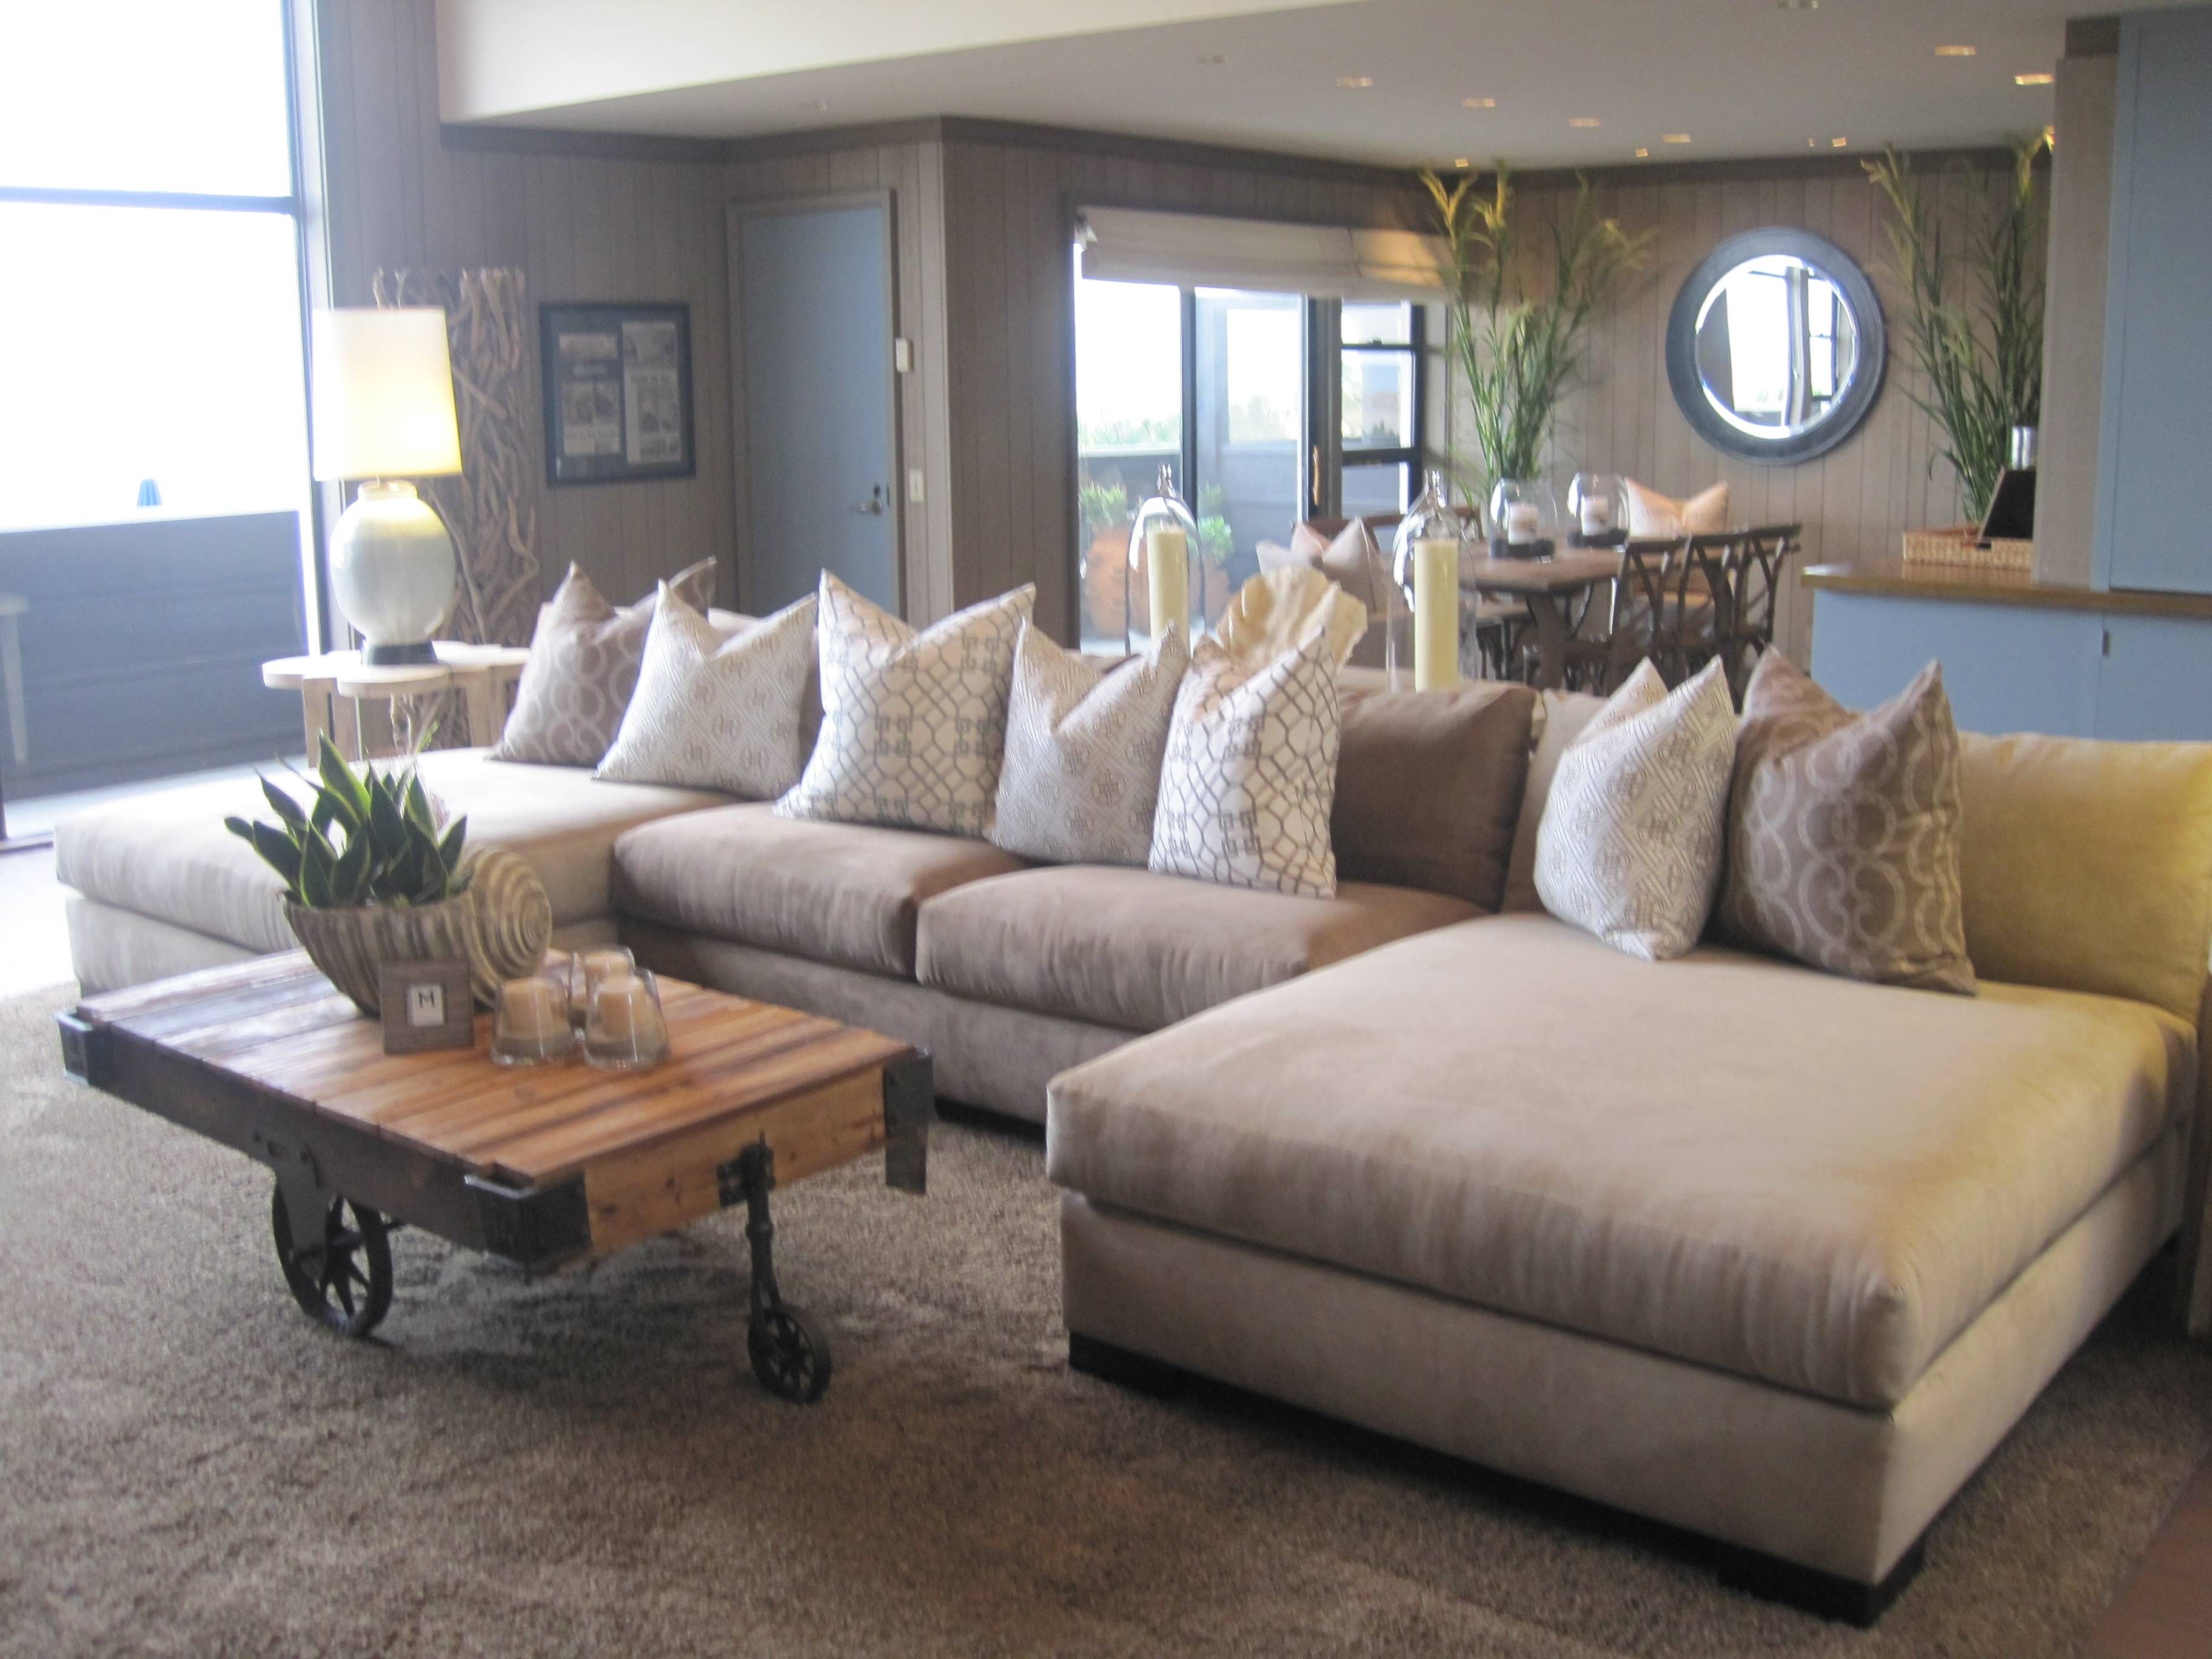 Furniture: Mesmerizing Costco Sectionals Sofa For Cozy Living Room Inside Berkline Sectional Sofa (View 11 of 30)